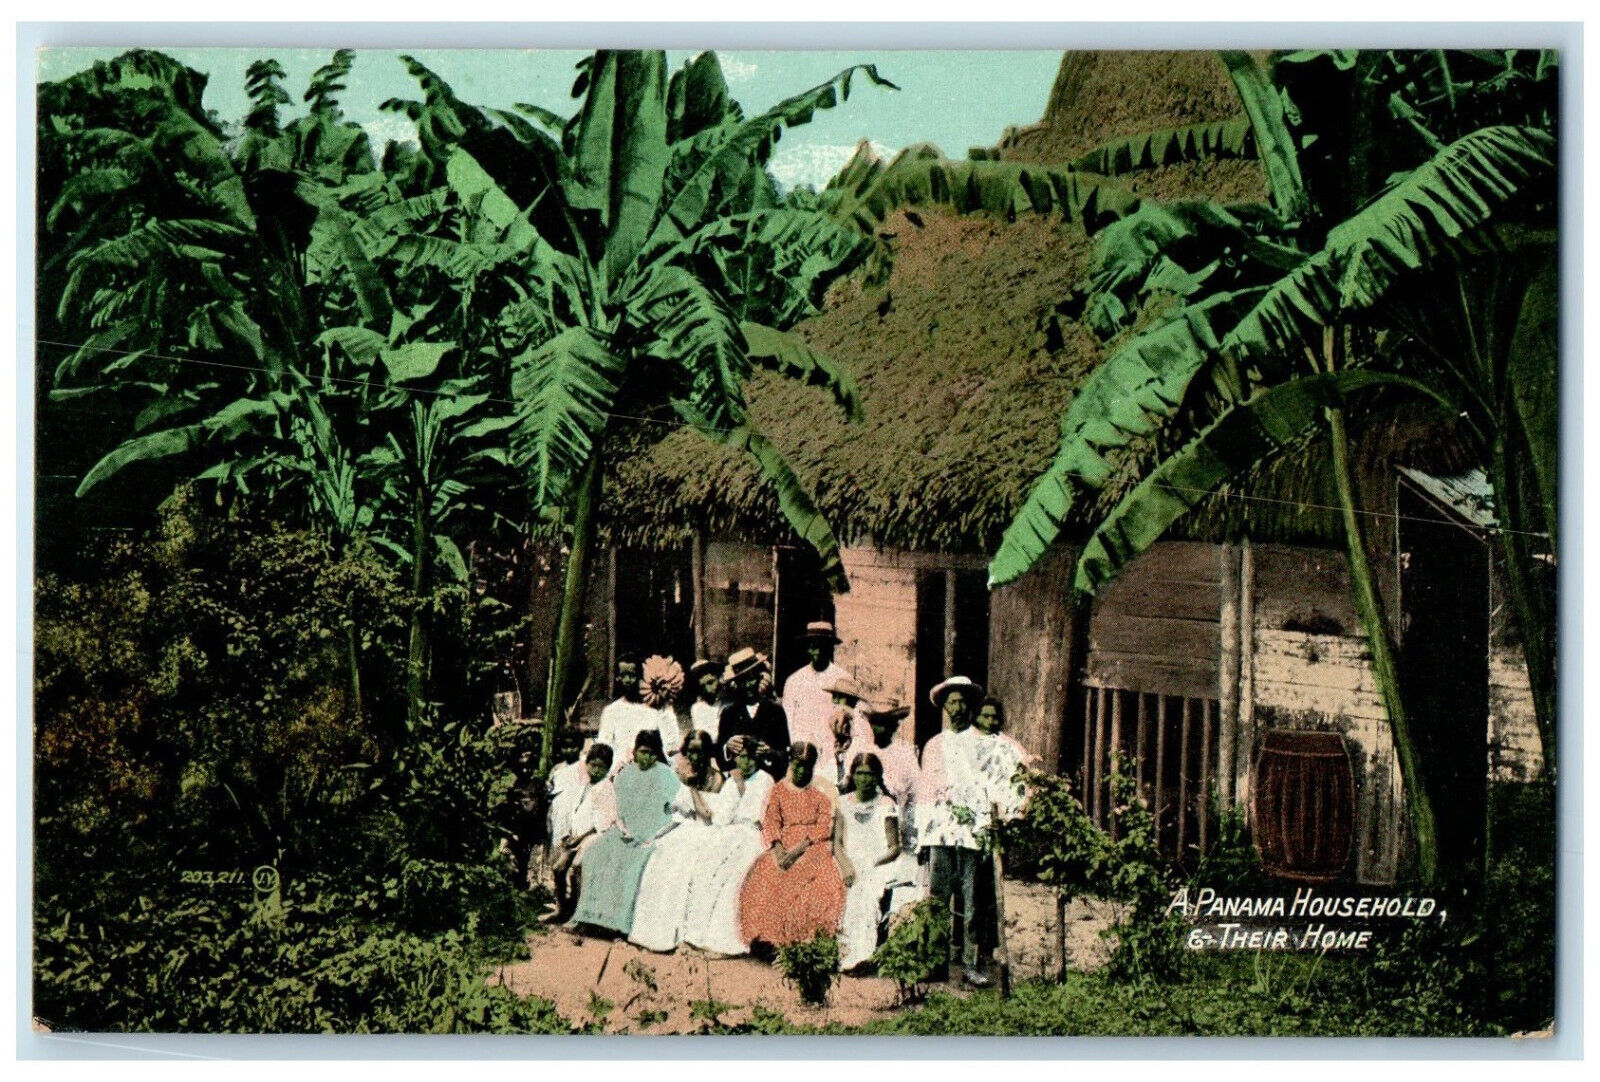 c1910 Men Wearing Hat A Panama Household and Their Home Unposted Postcard